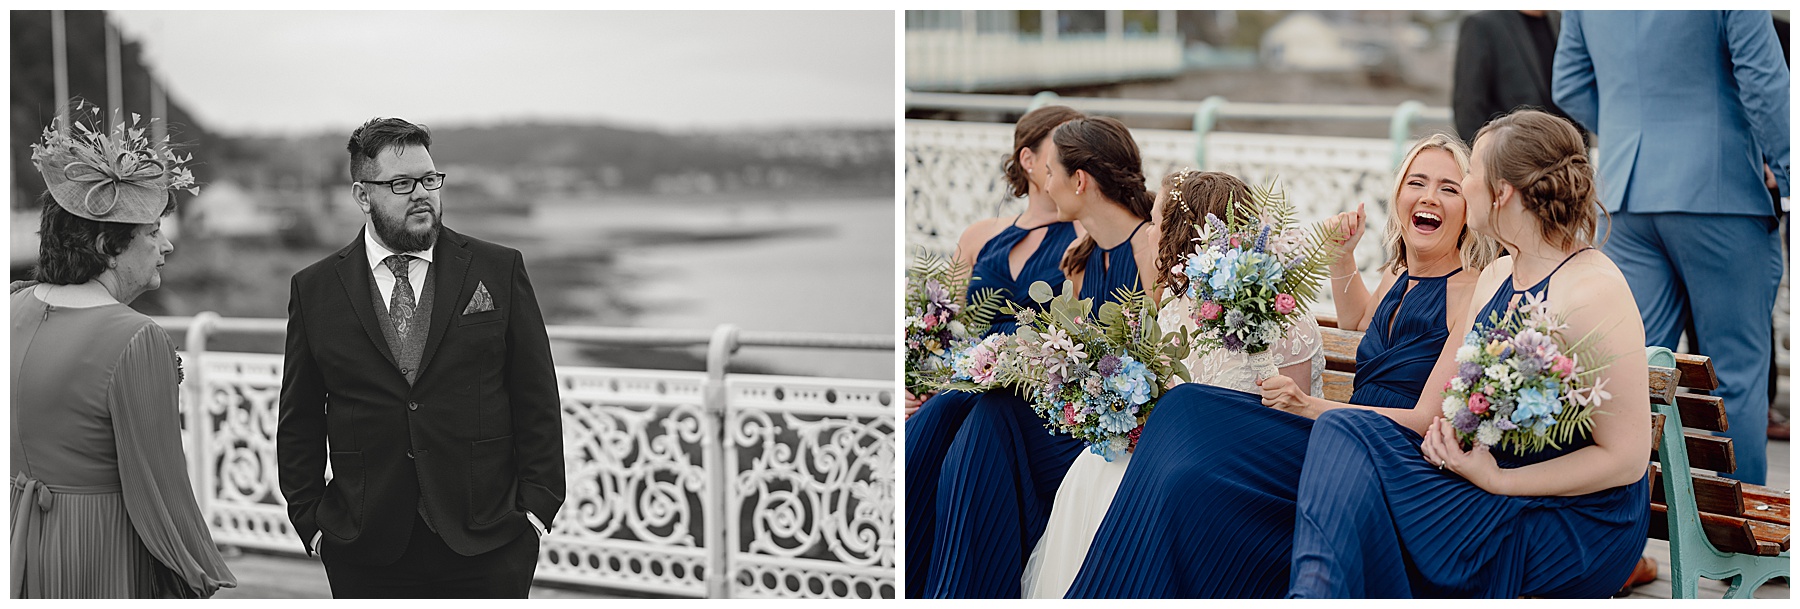 Wedding Guests on Mumbles Pier